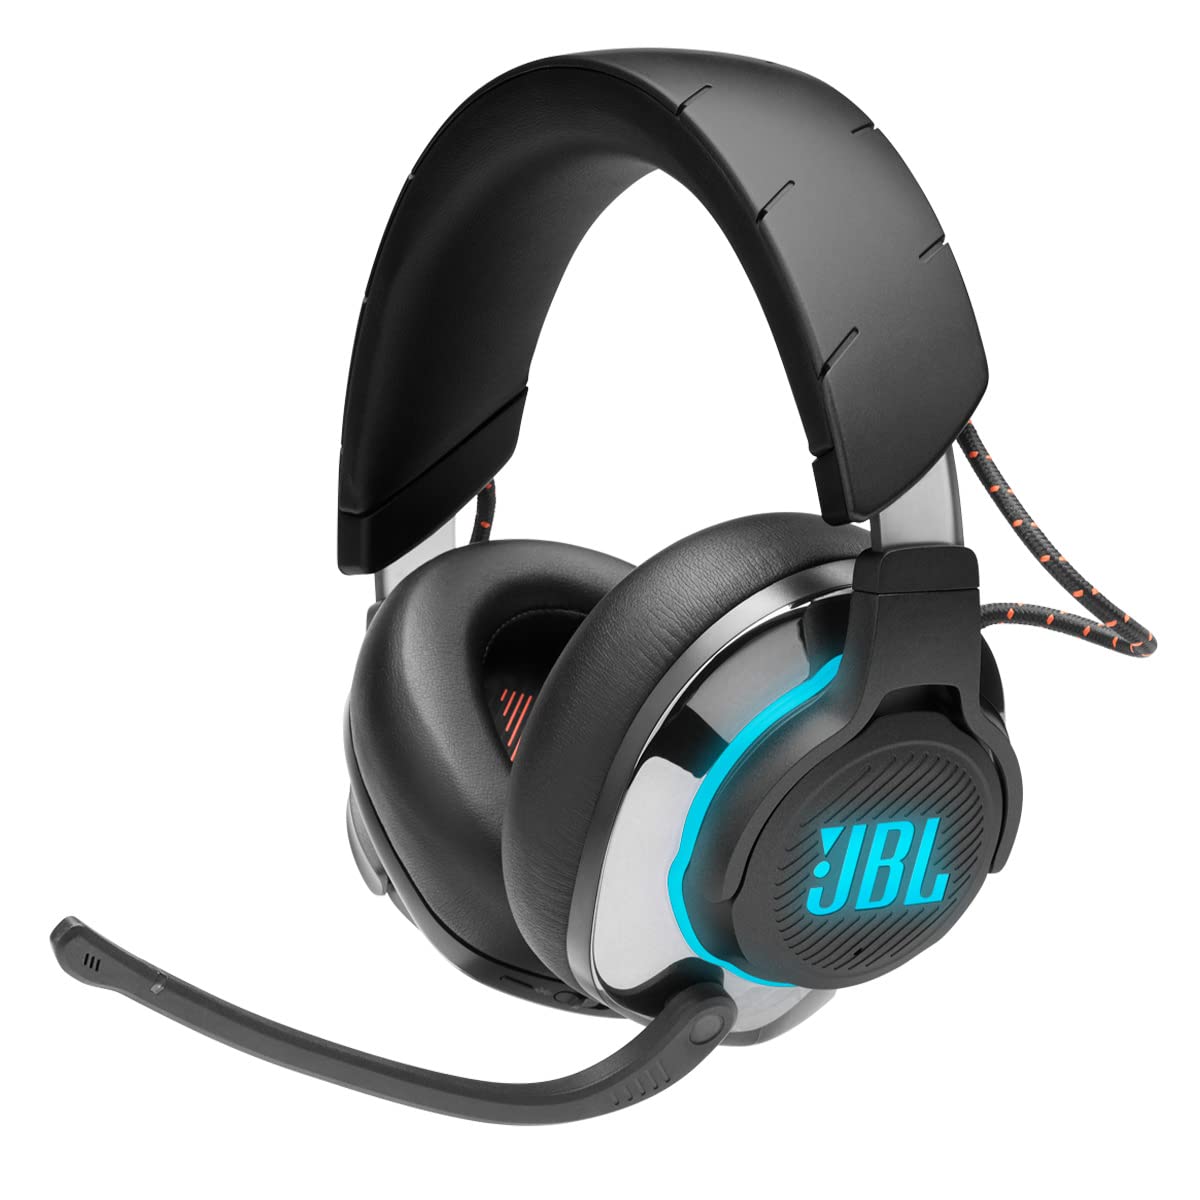 JBL Quantum 810 Wireless ANC Over-Ear Gaming Headset $99.95 + Free Shipping